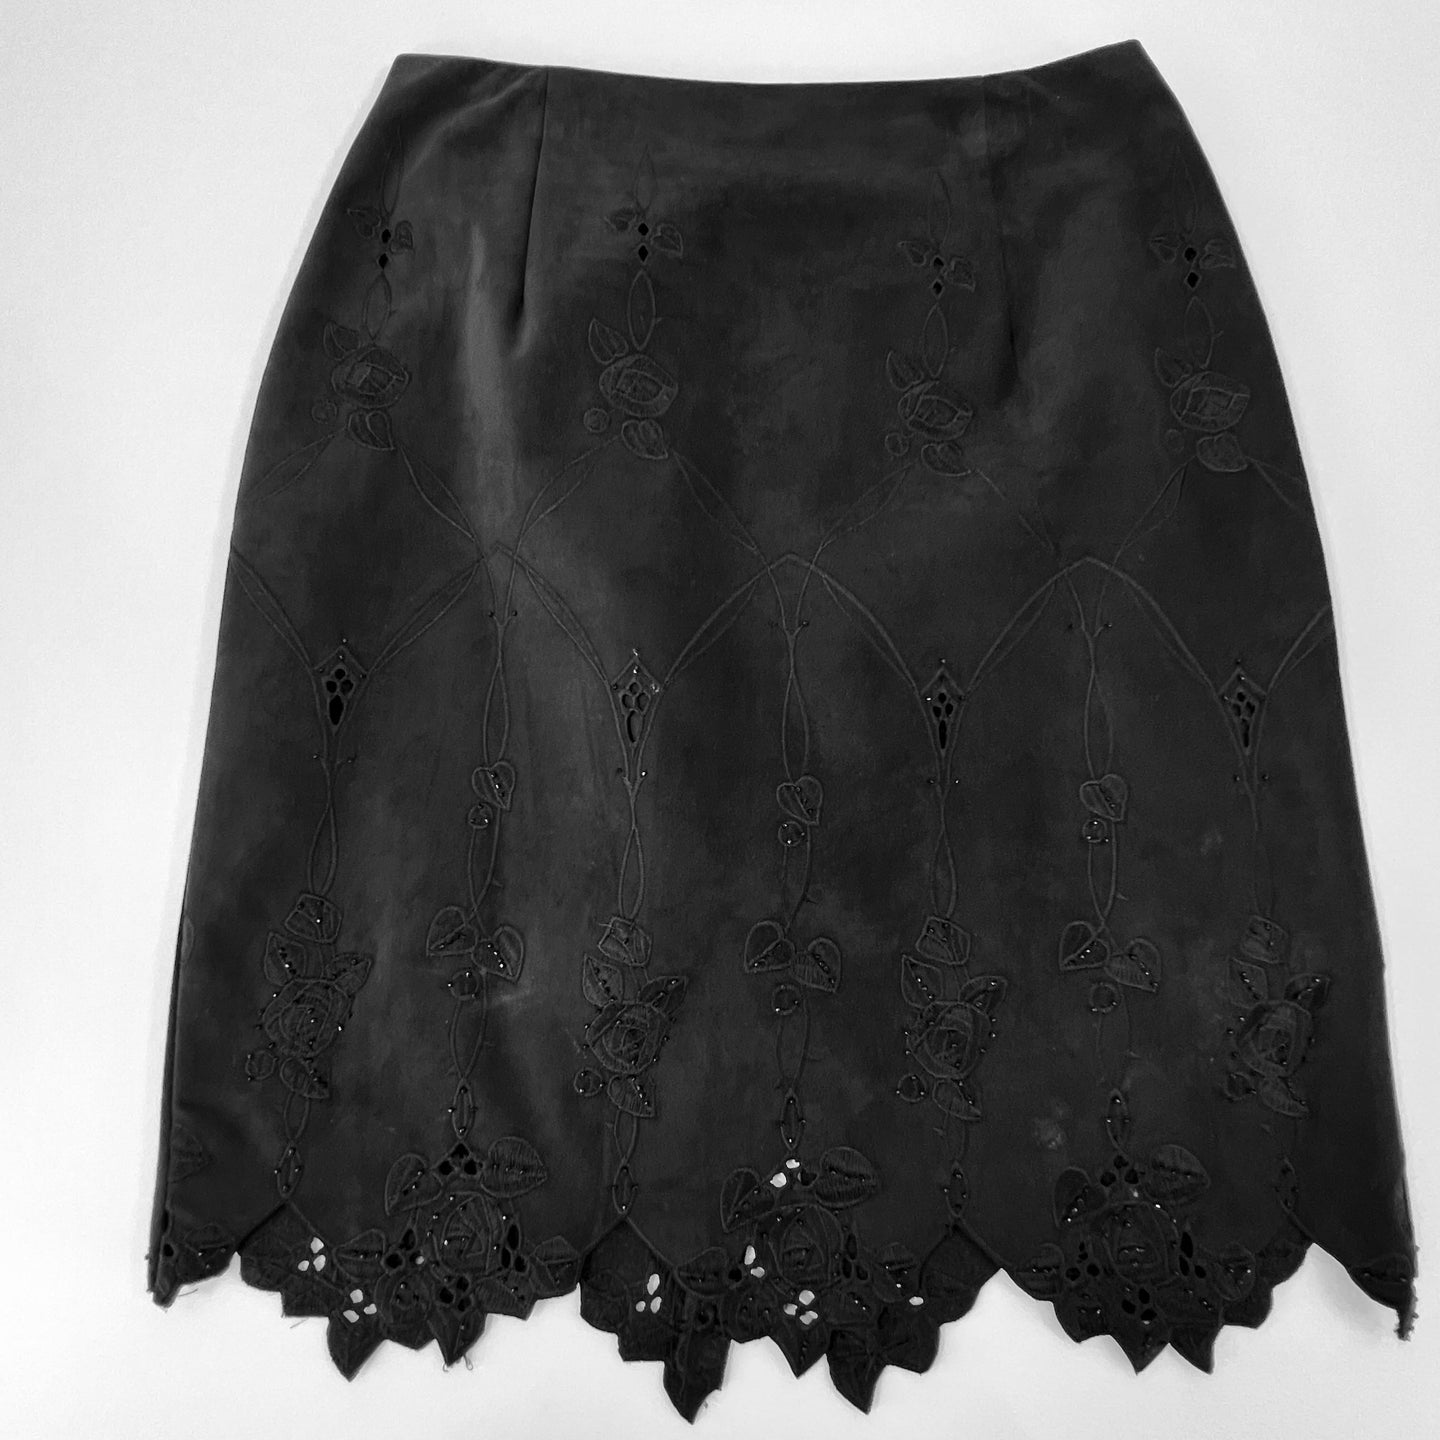 VTG Faux Suede Black Embroidered & Beaded Skirt Size 8